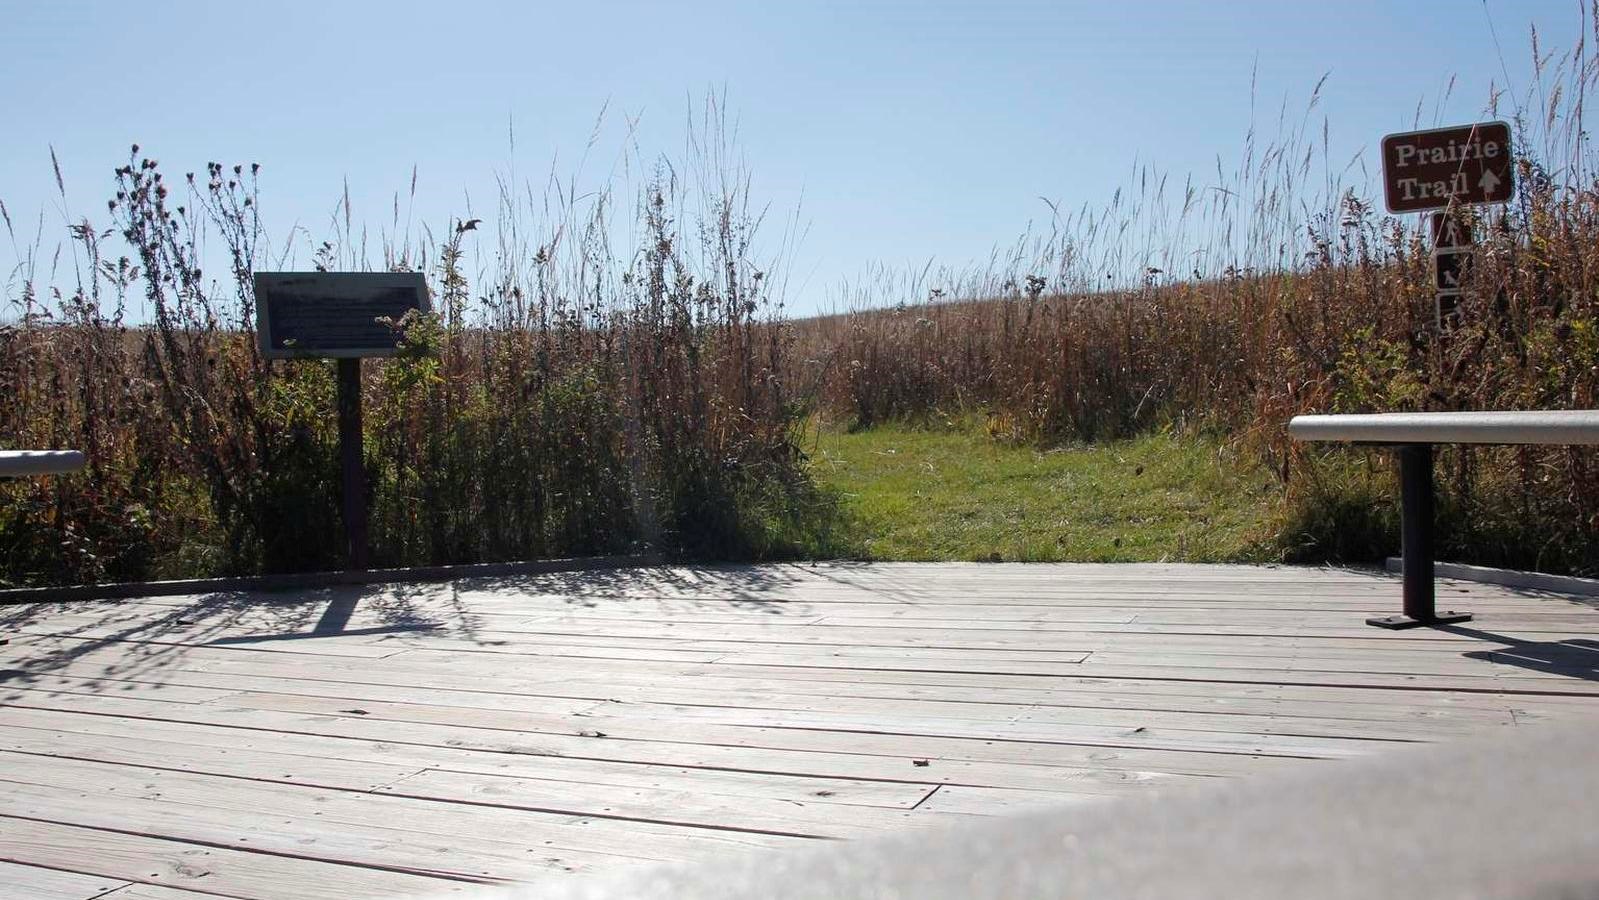 A circular plank deck with benches has a sign marking the entrance to a mowed grass prairie trail.